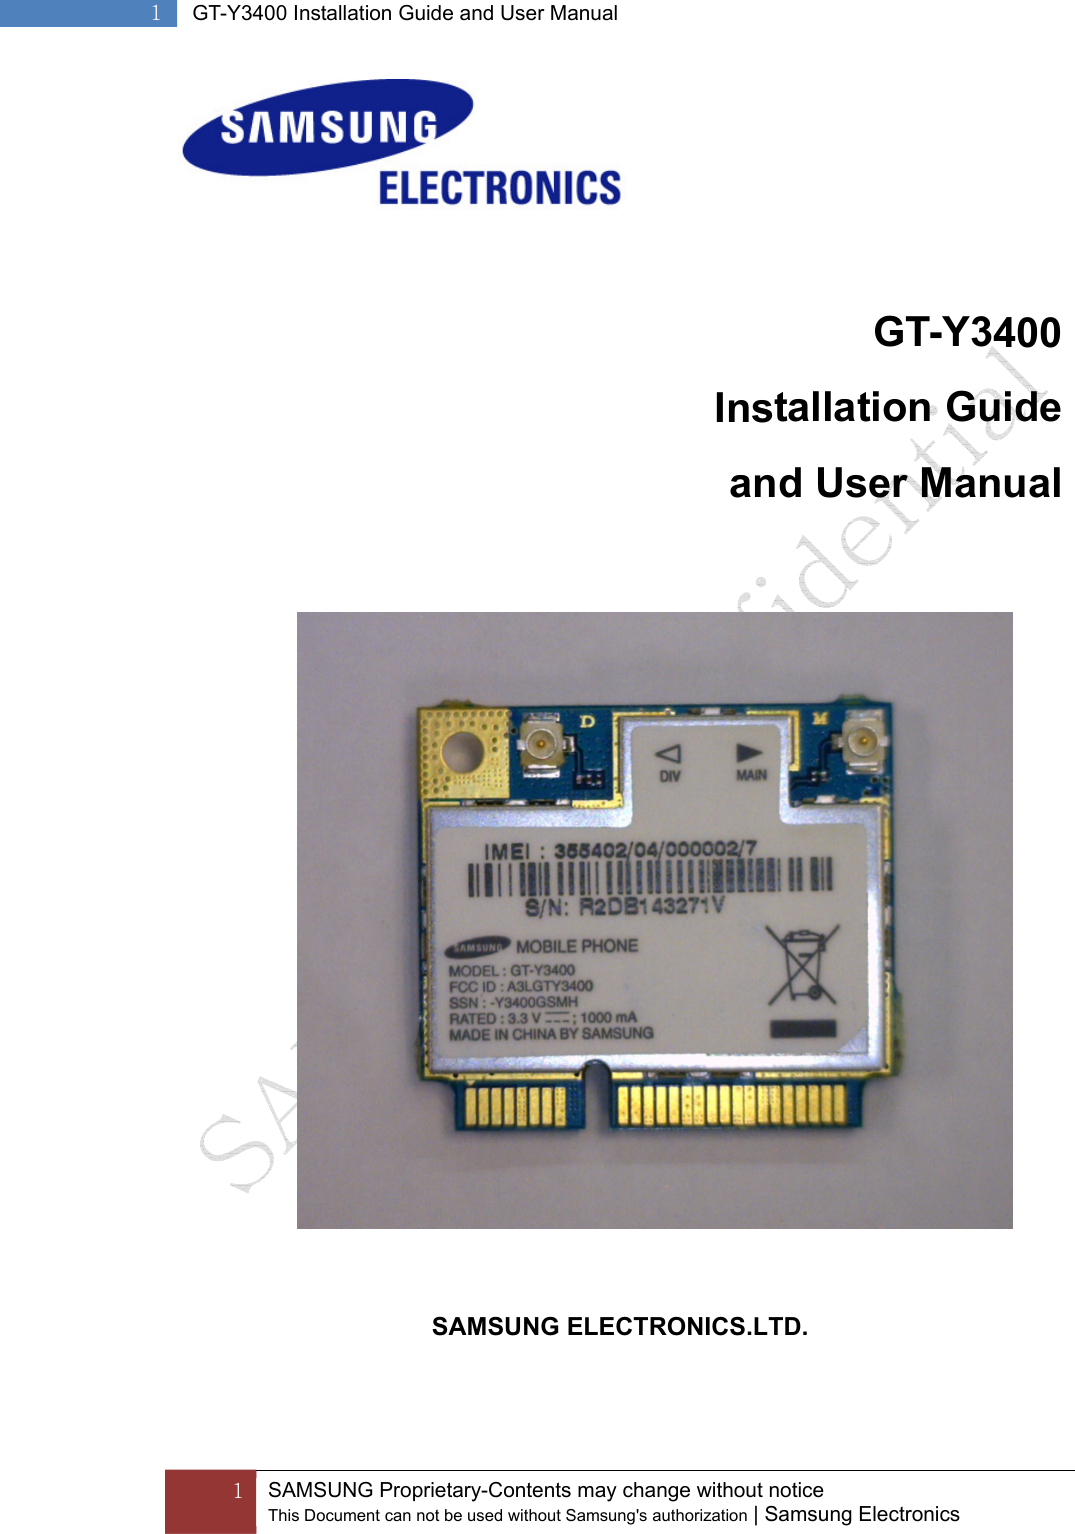  1  SAMSUNG Proprietary-Contents may change without notice This Document can not be used without Samsung&apos;s authorization | Samsung Electronics  1  GT-Y3400 Installation Guide and User Manual GT-Y3400Installation Guide and User Manual 07.Feb, 2011SAMSUNG ELECTRONICS.LTD. 